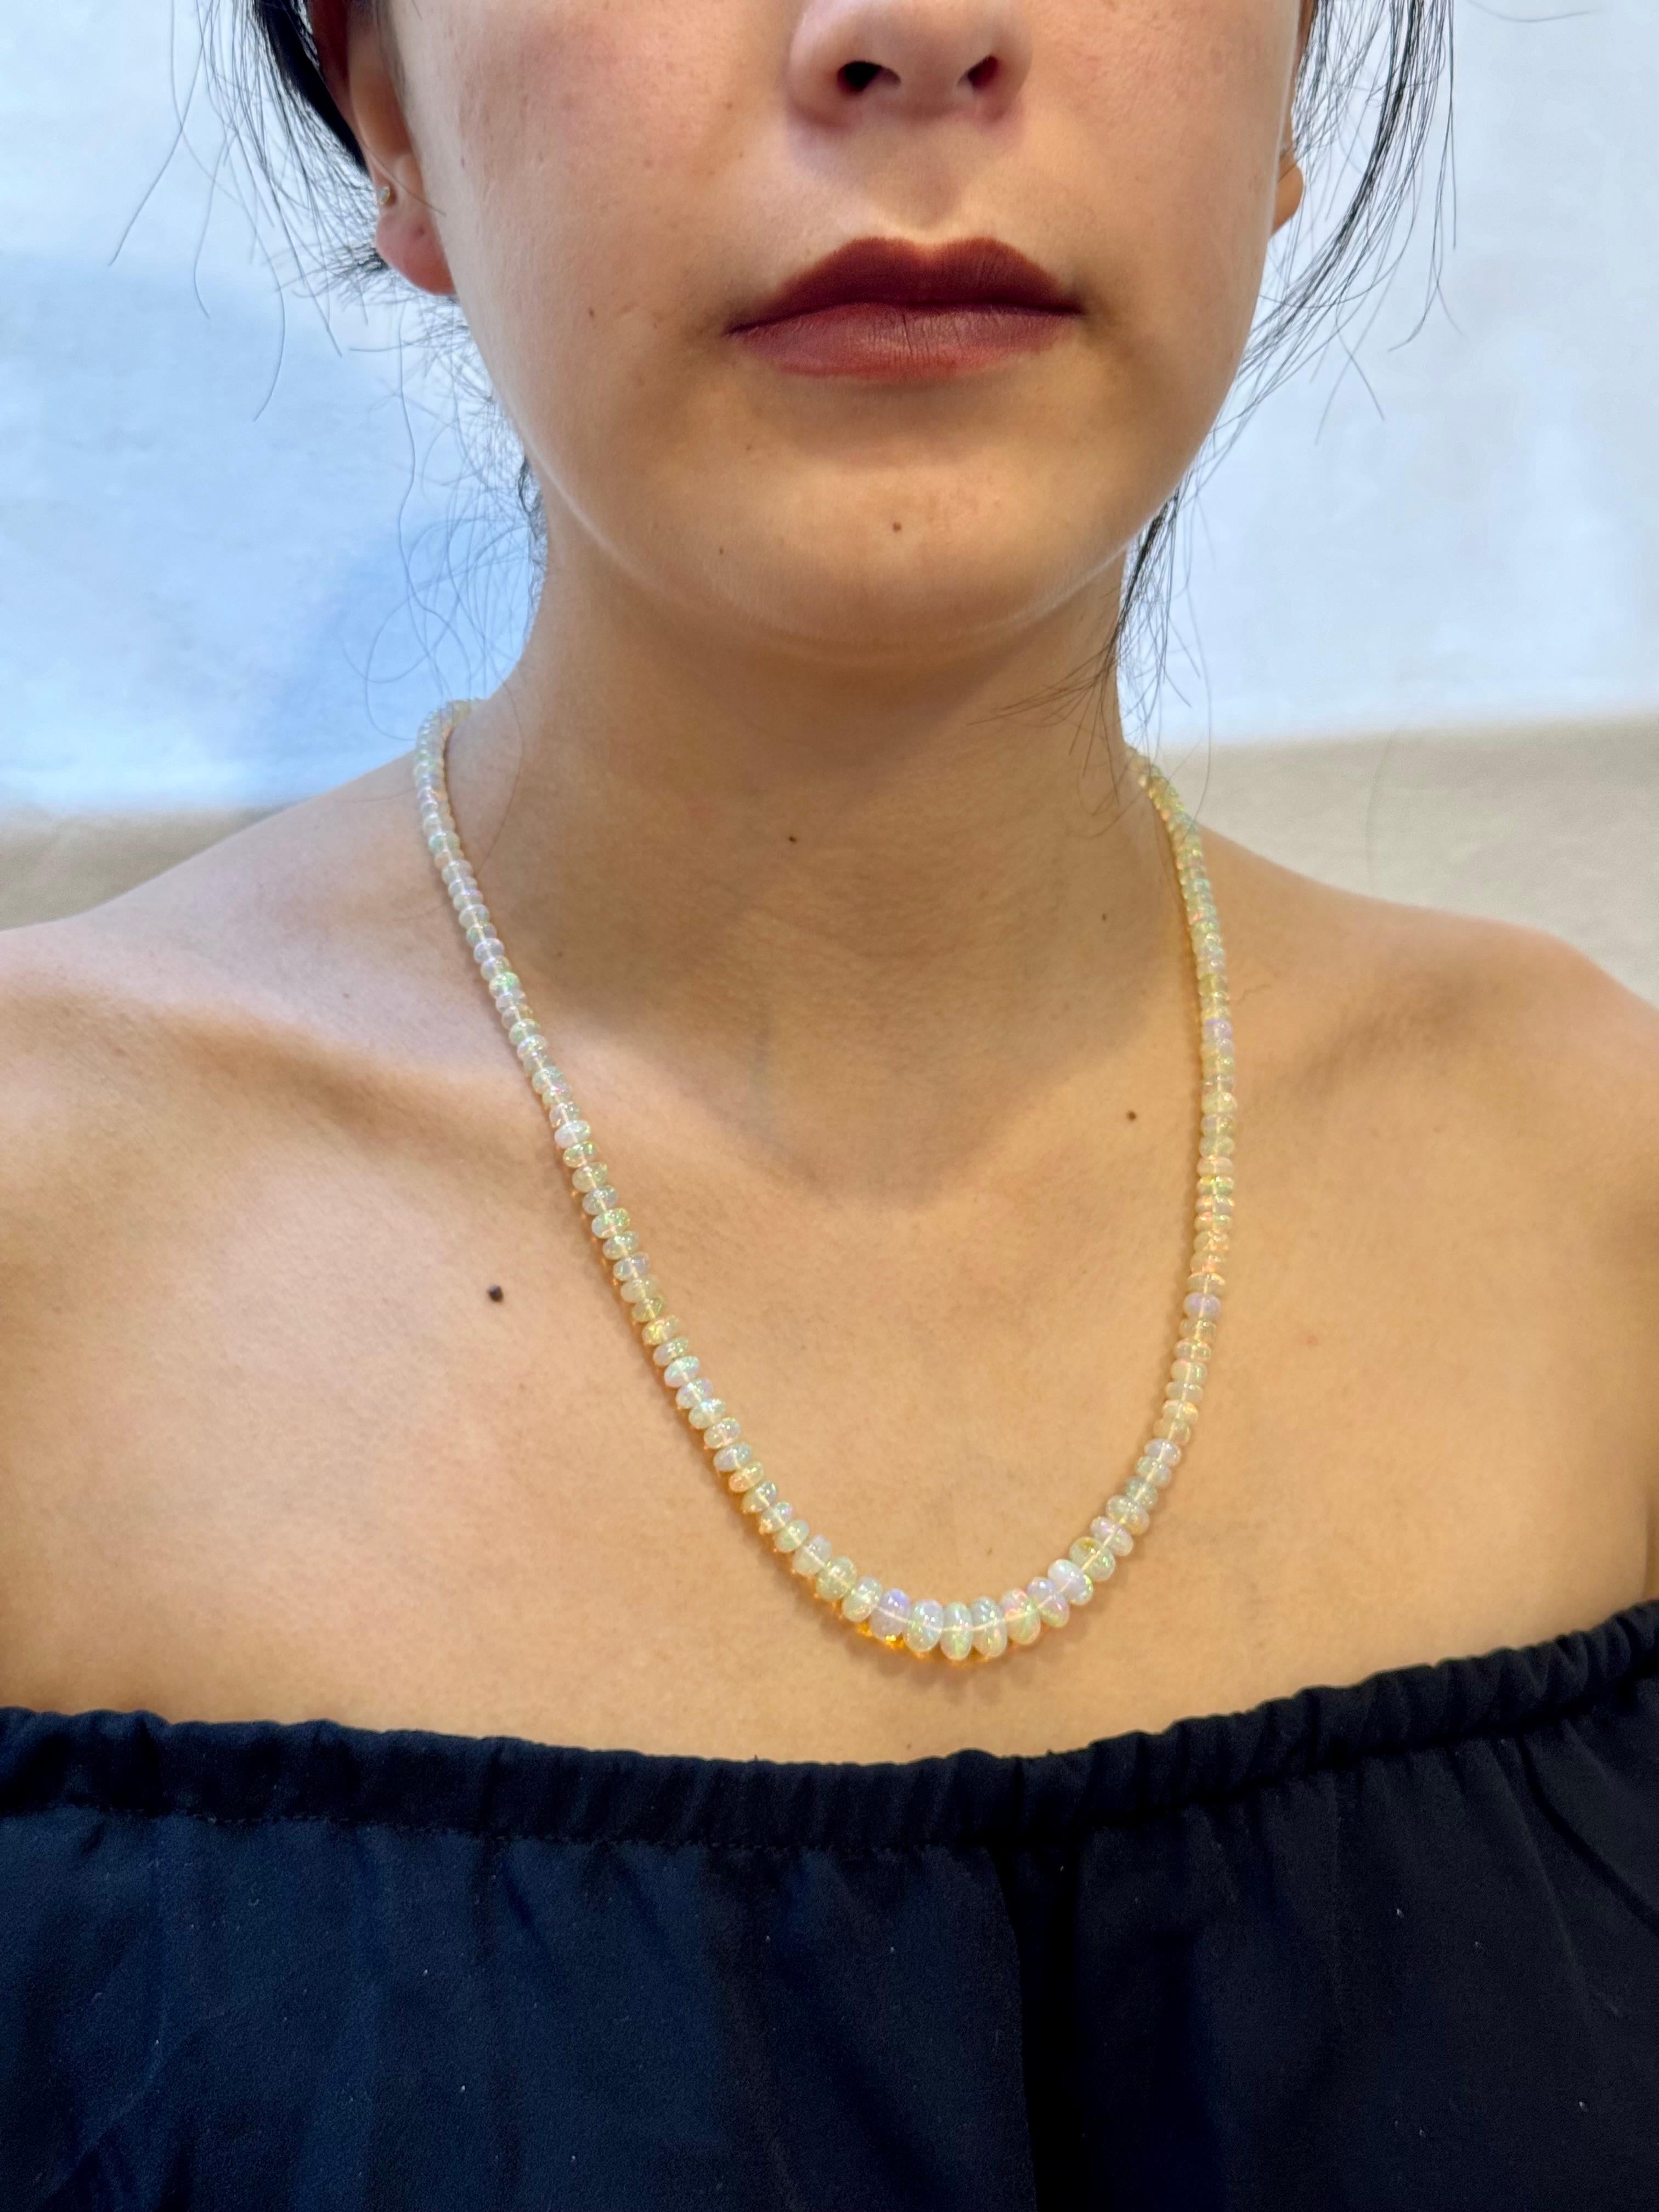 Natural 115 Ct Ethiopian Opal Bead Single Strand Necklace 14 Karat Yellow Gold For Sale 12